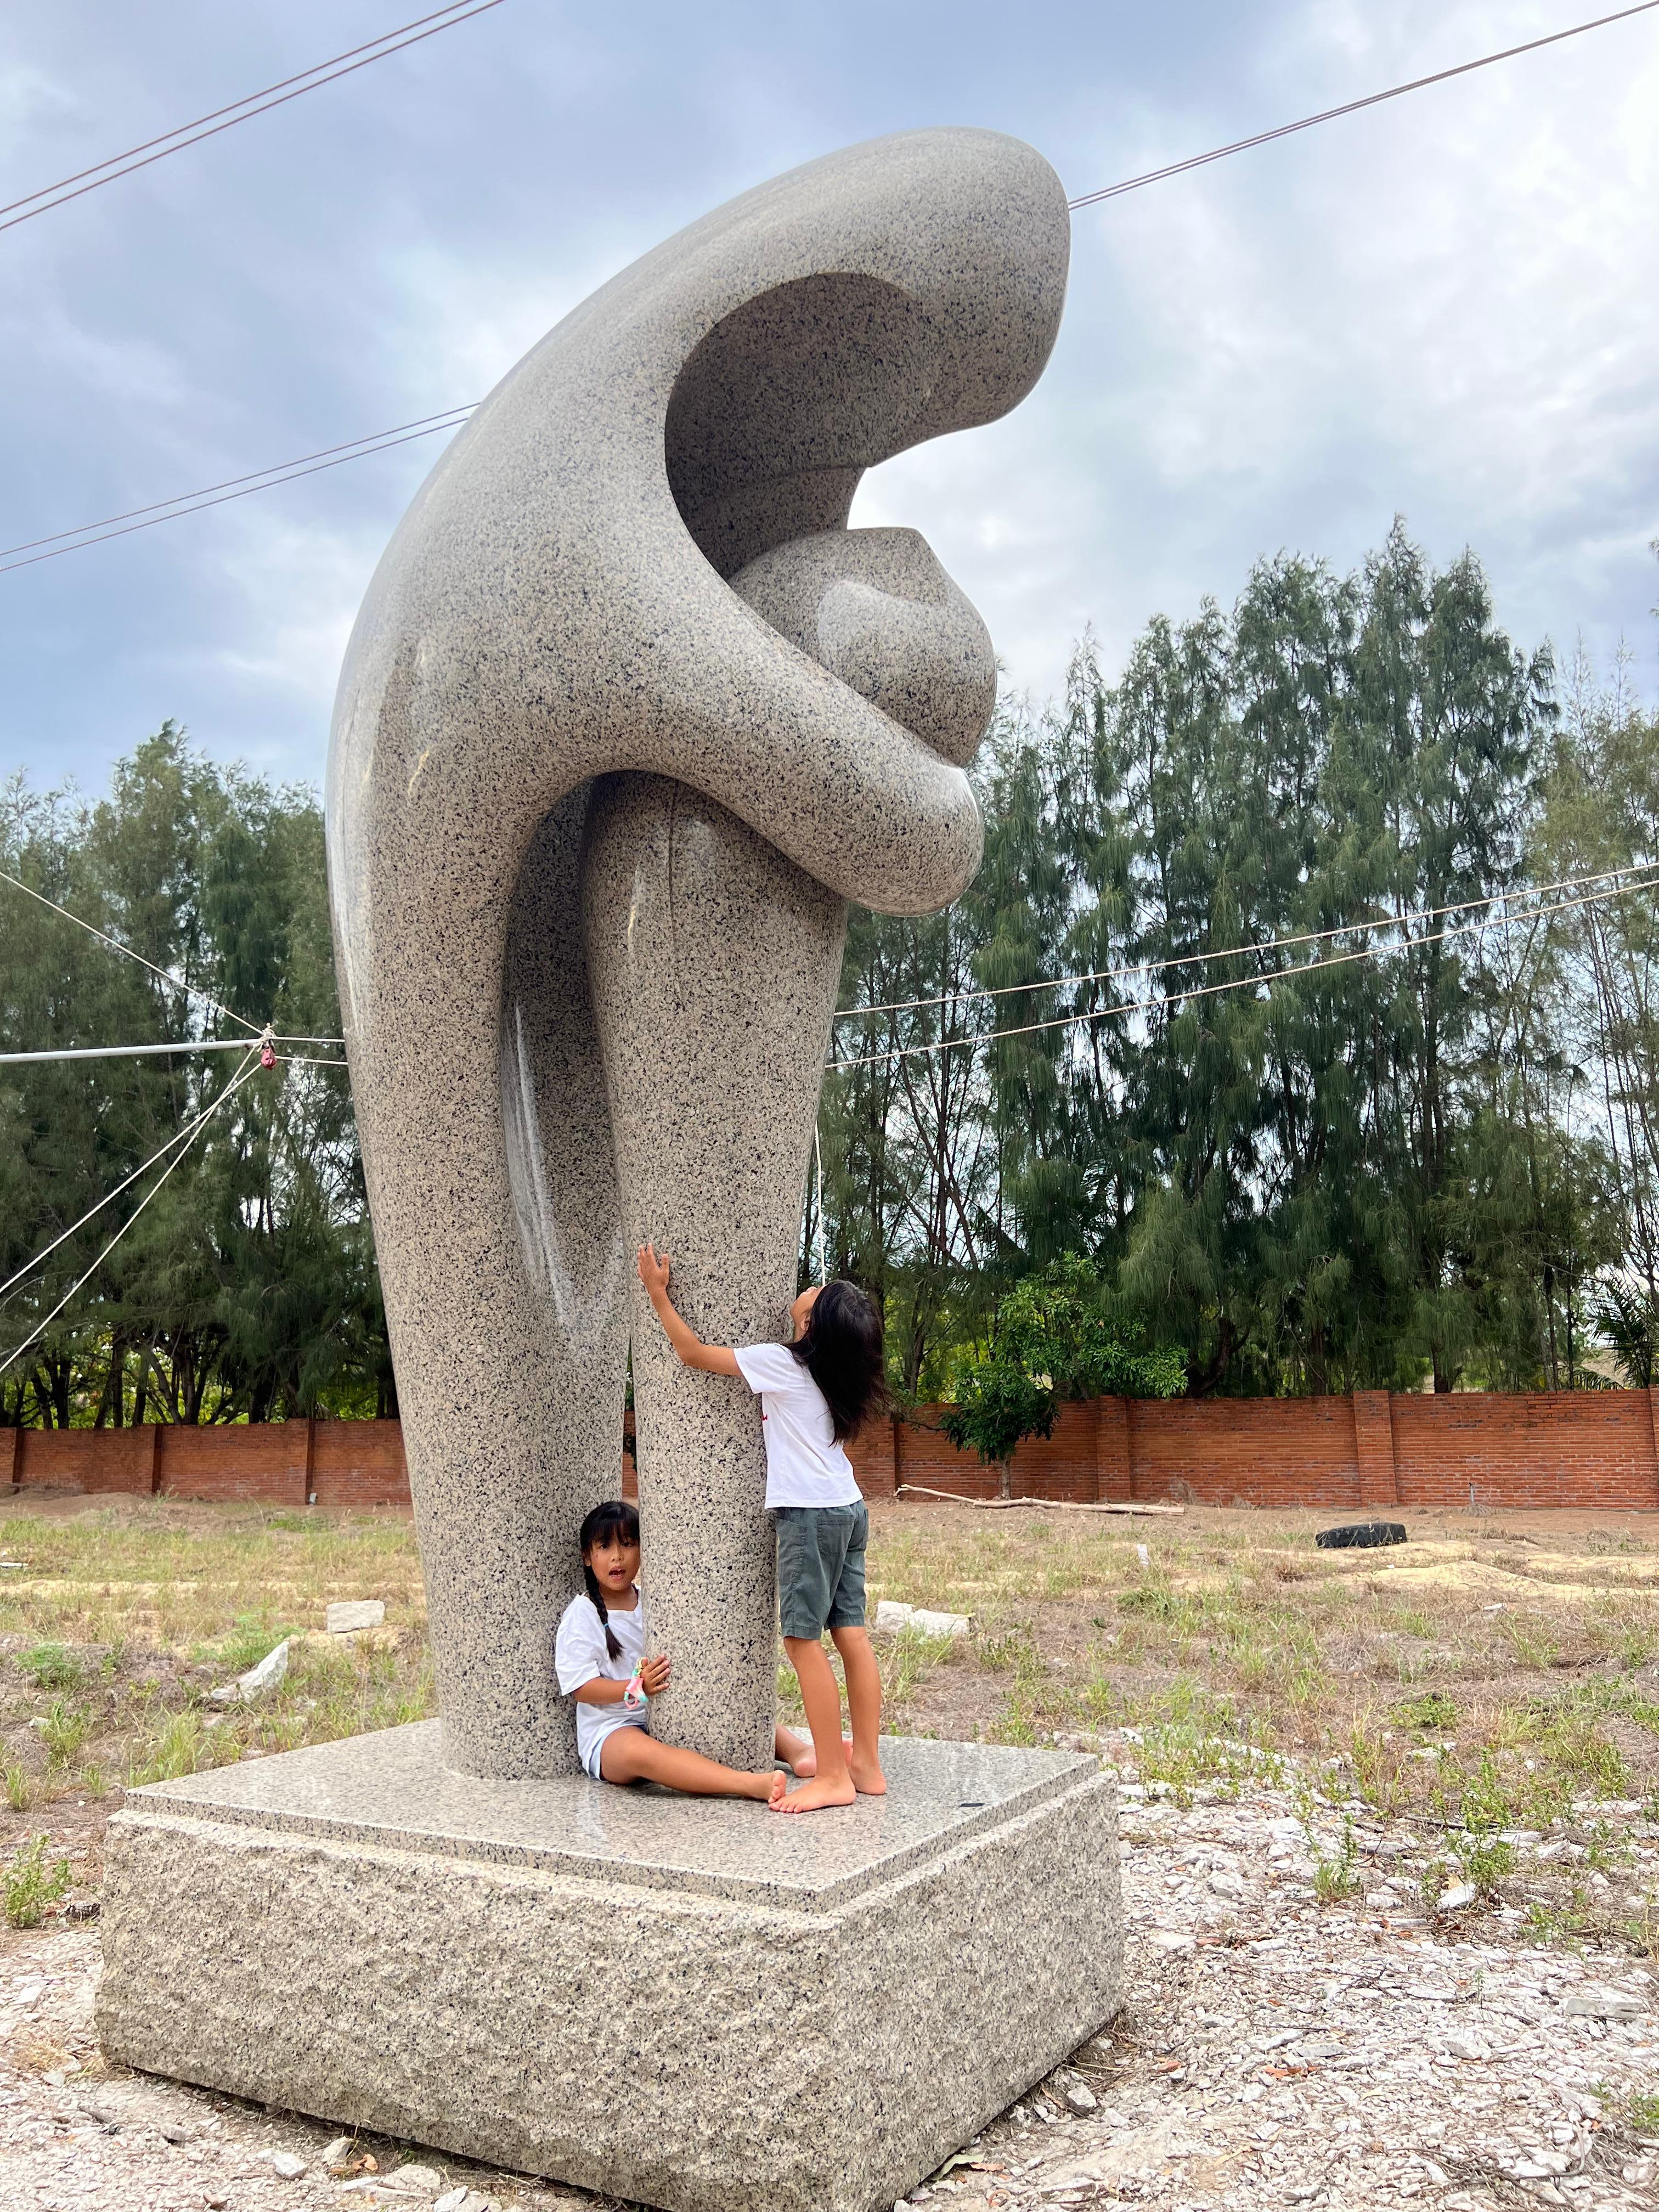 A Soul Consoled, Khang Pham-New, monumental, granite sculpture, mother and child